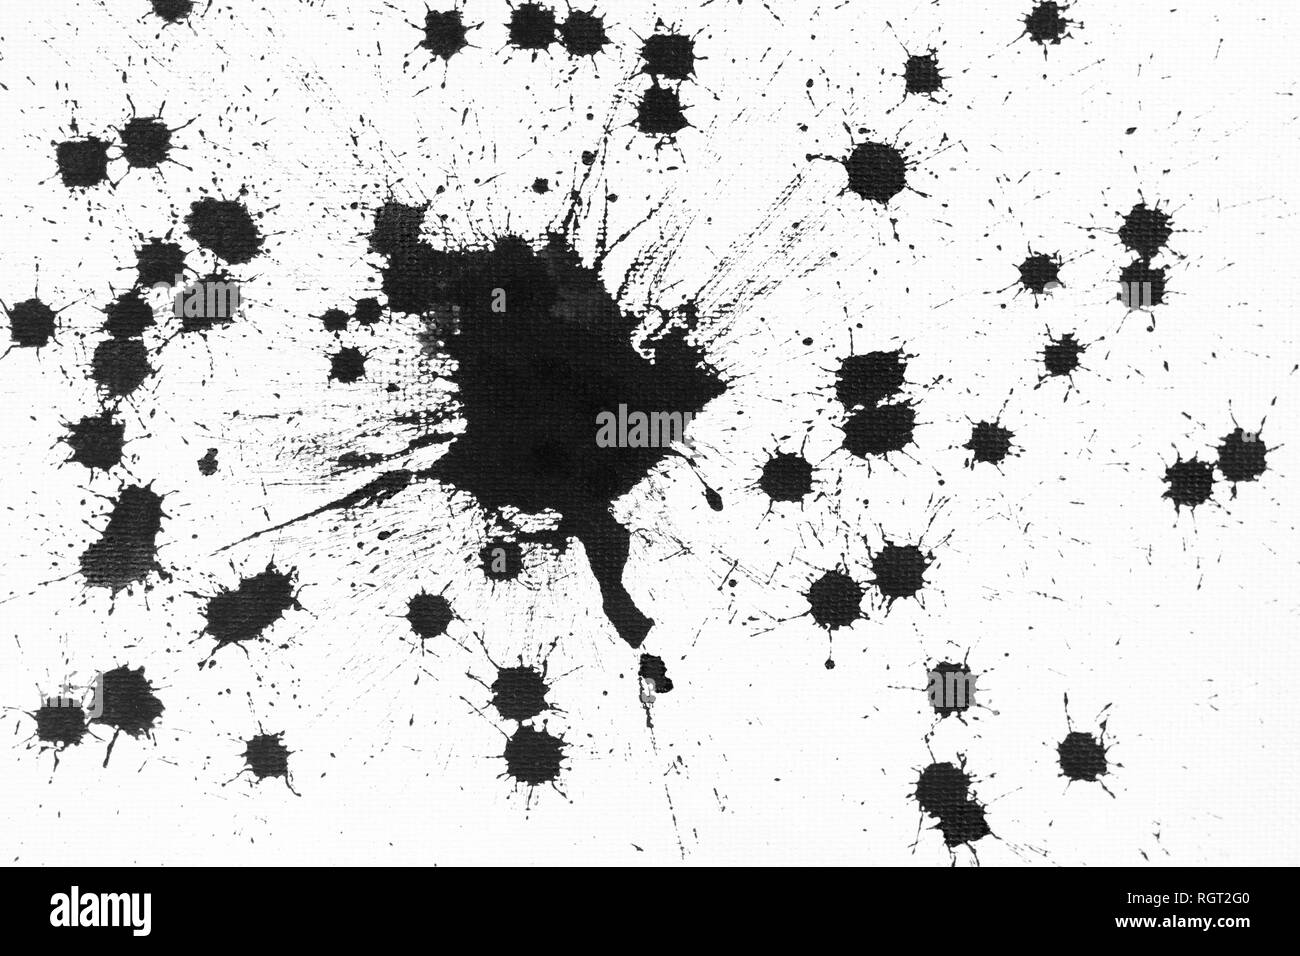 Paint splatter Black and White Stock Photos & Images - Alamy